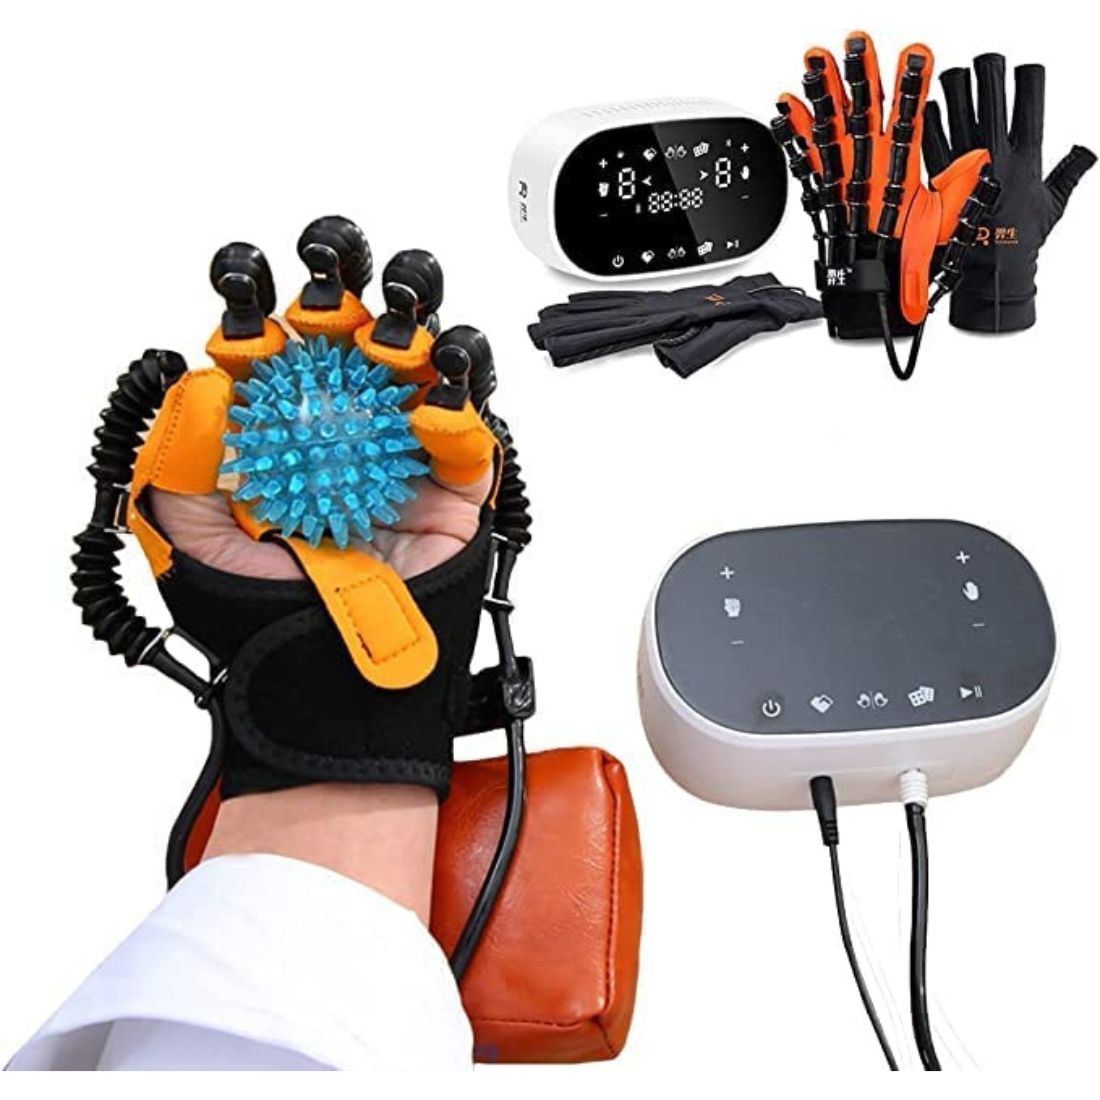 Hand Therapy Rehabilitation Glove for Stroke | SaeboGlove